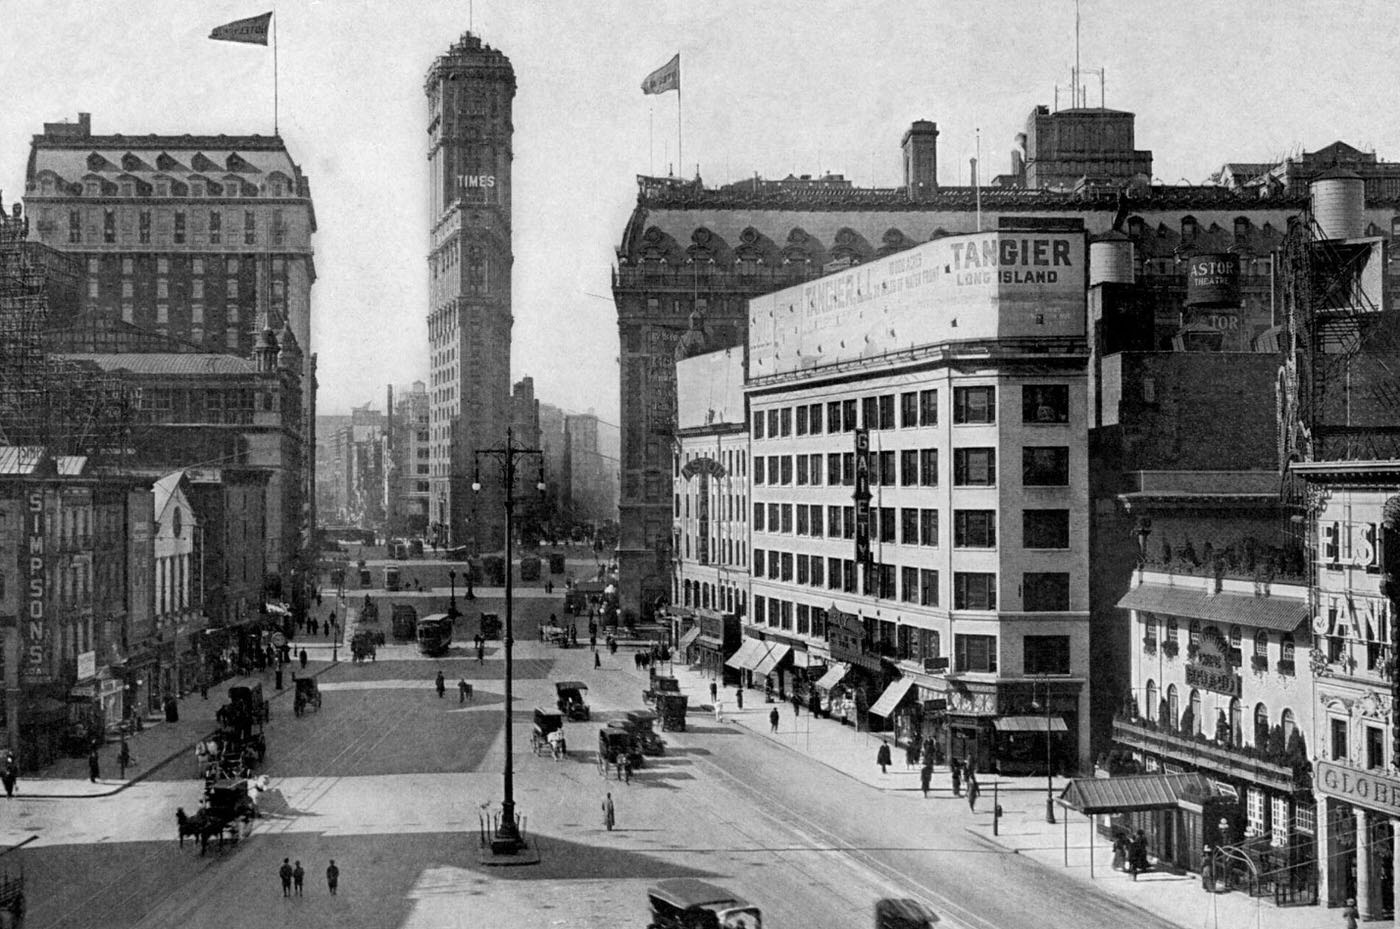 Times Square, New York City, 1911